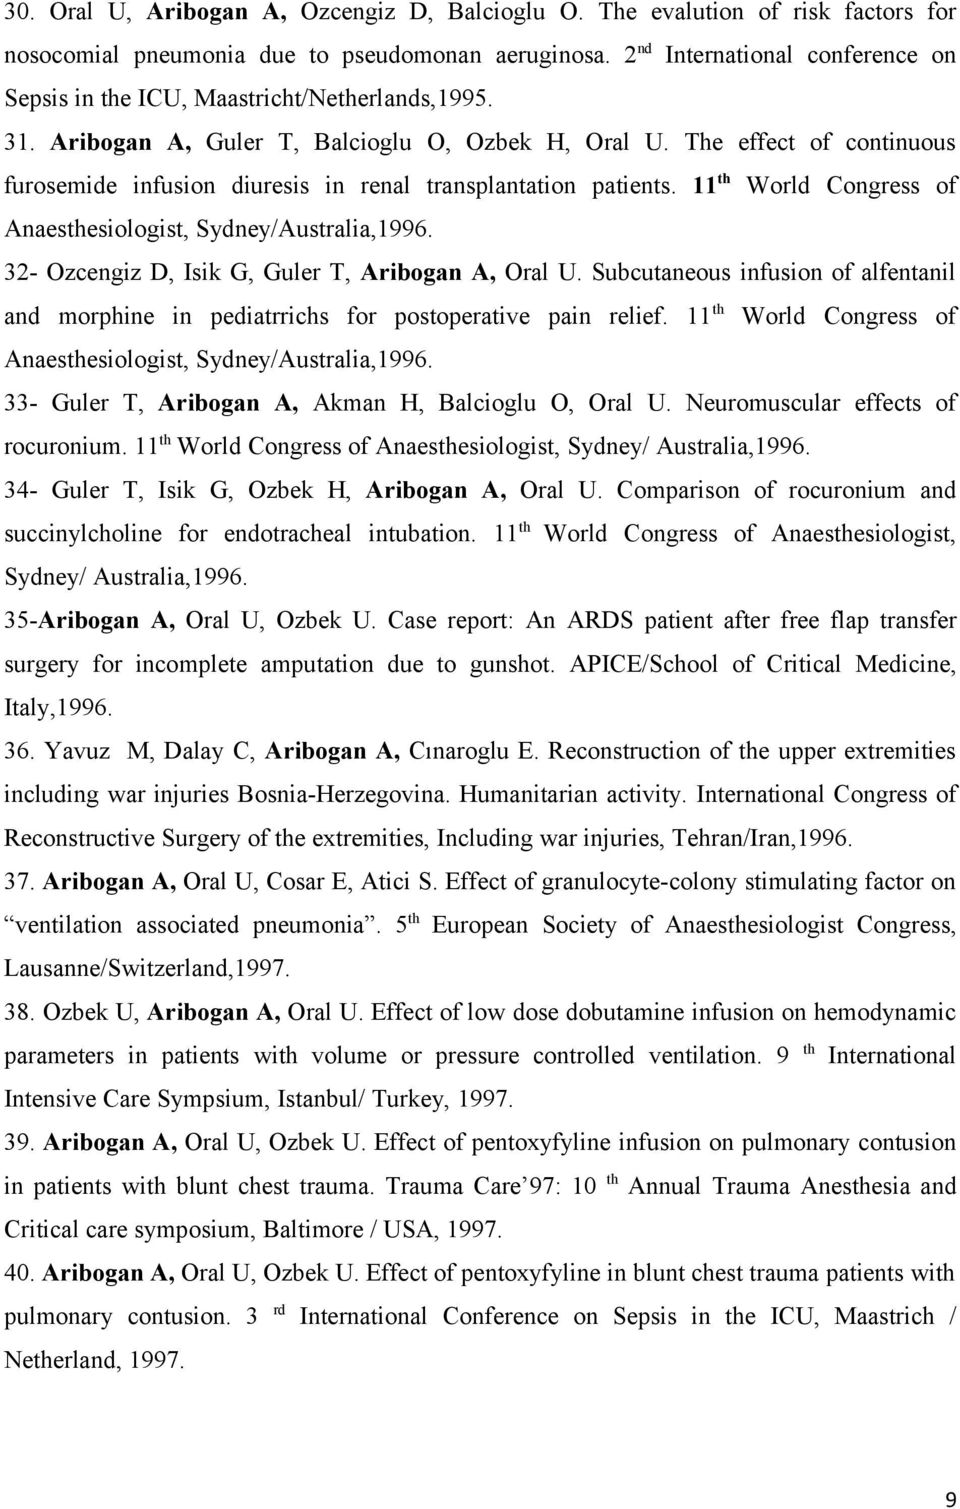 The effect of continuous furosemide infusion diuresis in renal transplantation patients. 11 th World Congress of Anaesthesiologist, Sydney/Australia,1996.